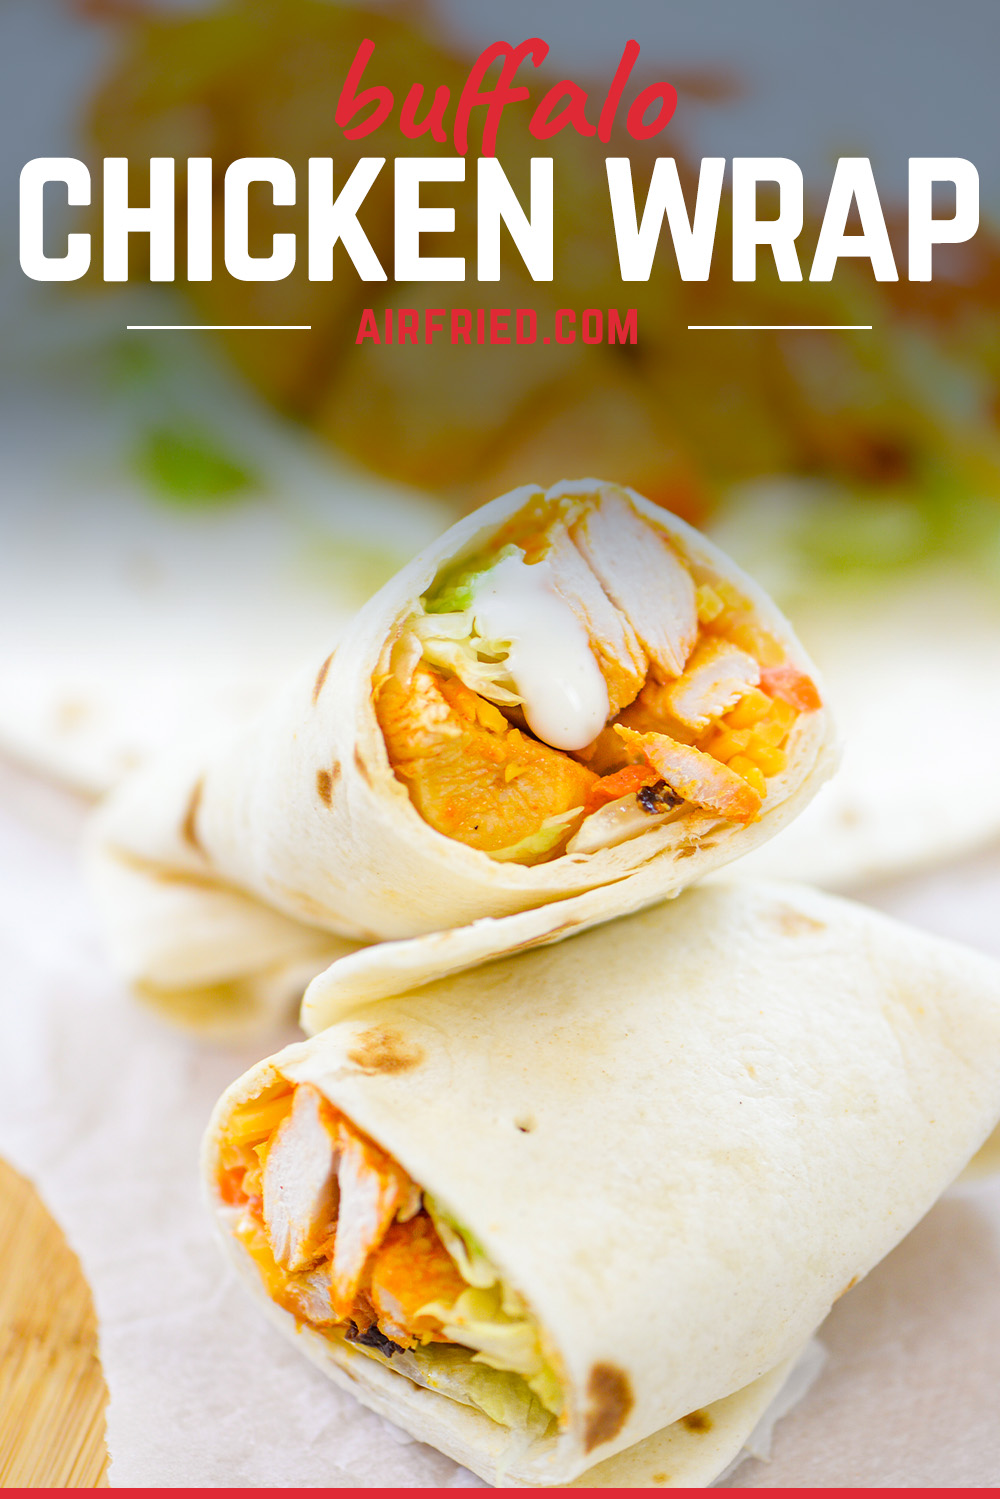 These easy Air Fryer Buffalo Chicken Wraps are an easy way to get lunch on the table! We toss bits of chicken in buffalo sauce, cook them in the air fryer, and then pile it on a tortilla with cheese, lettuce, and dressing to make a simple, flavorful wrap!